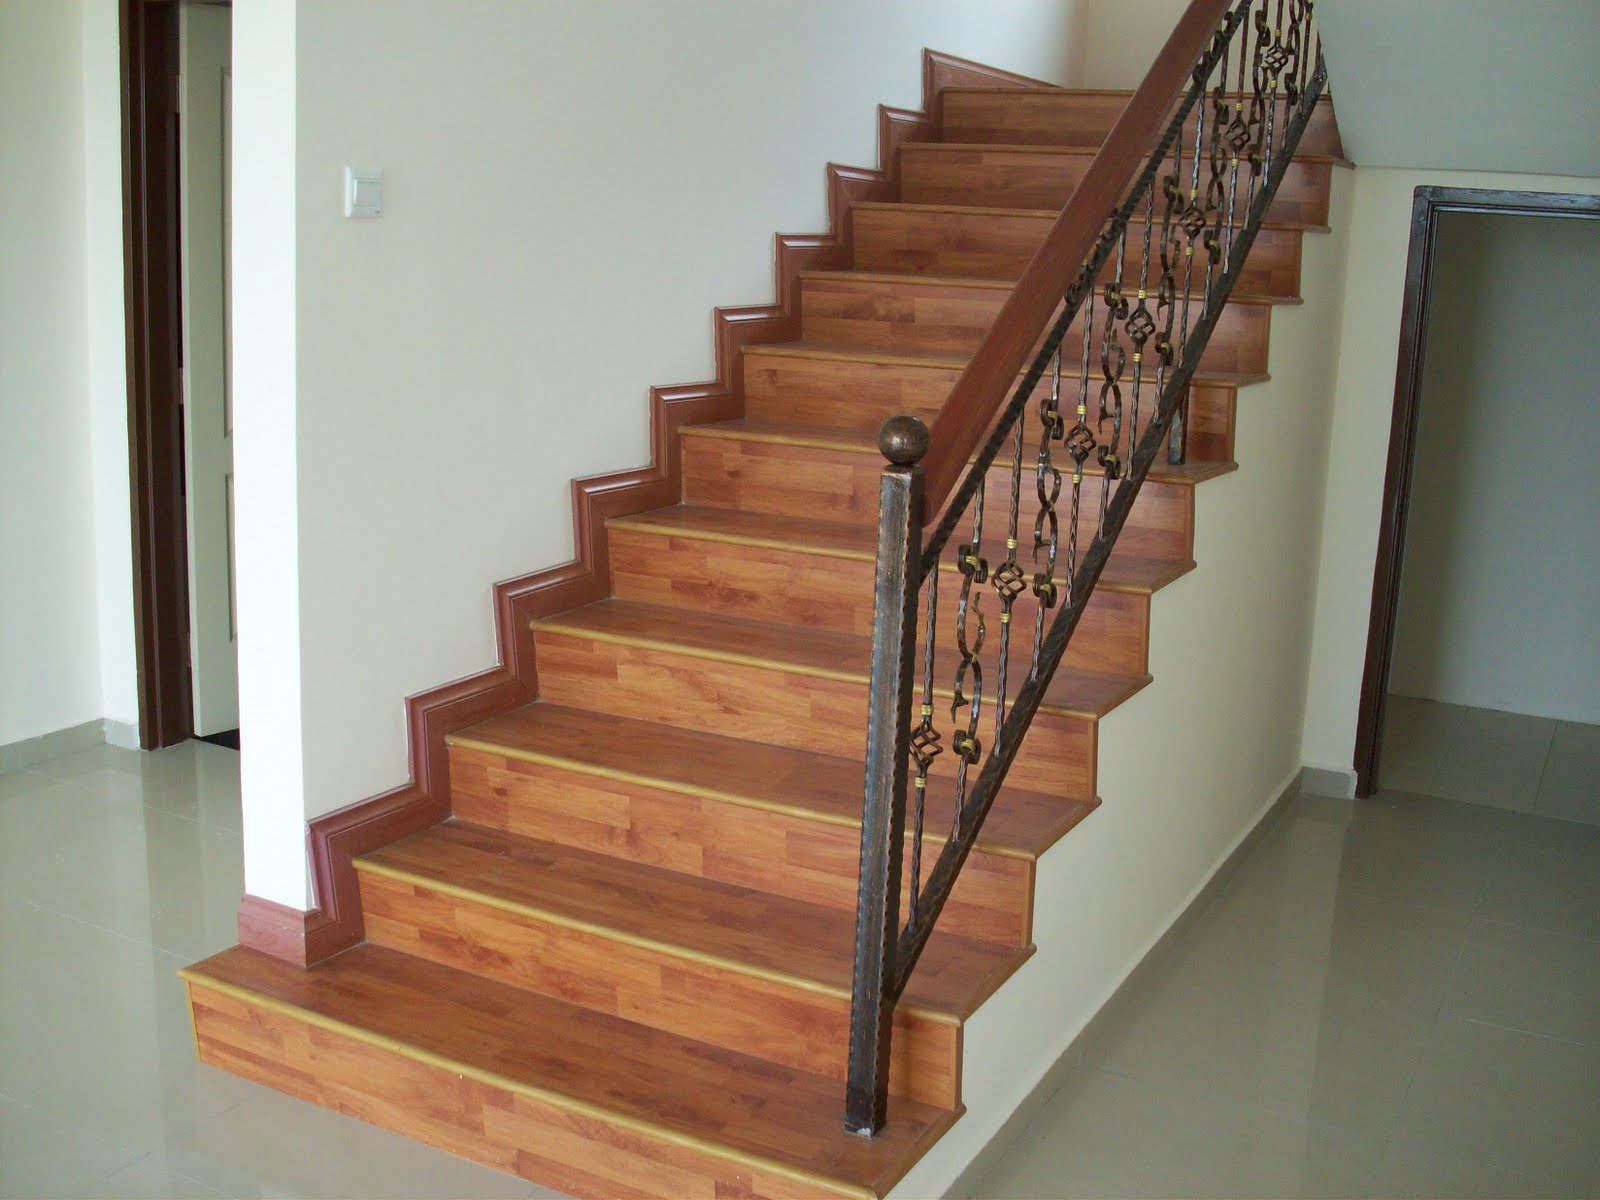 How To Install Wood Flooring On Stairs, How To Put Hardwood Flooring On Stairs